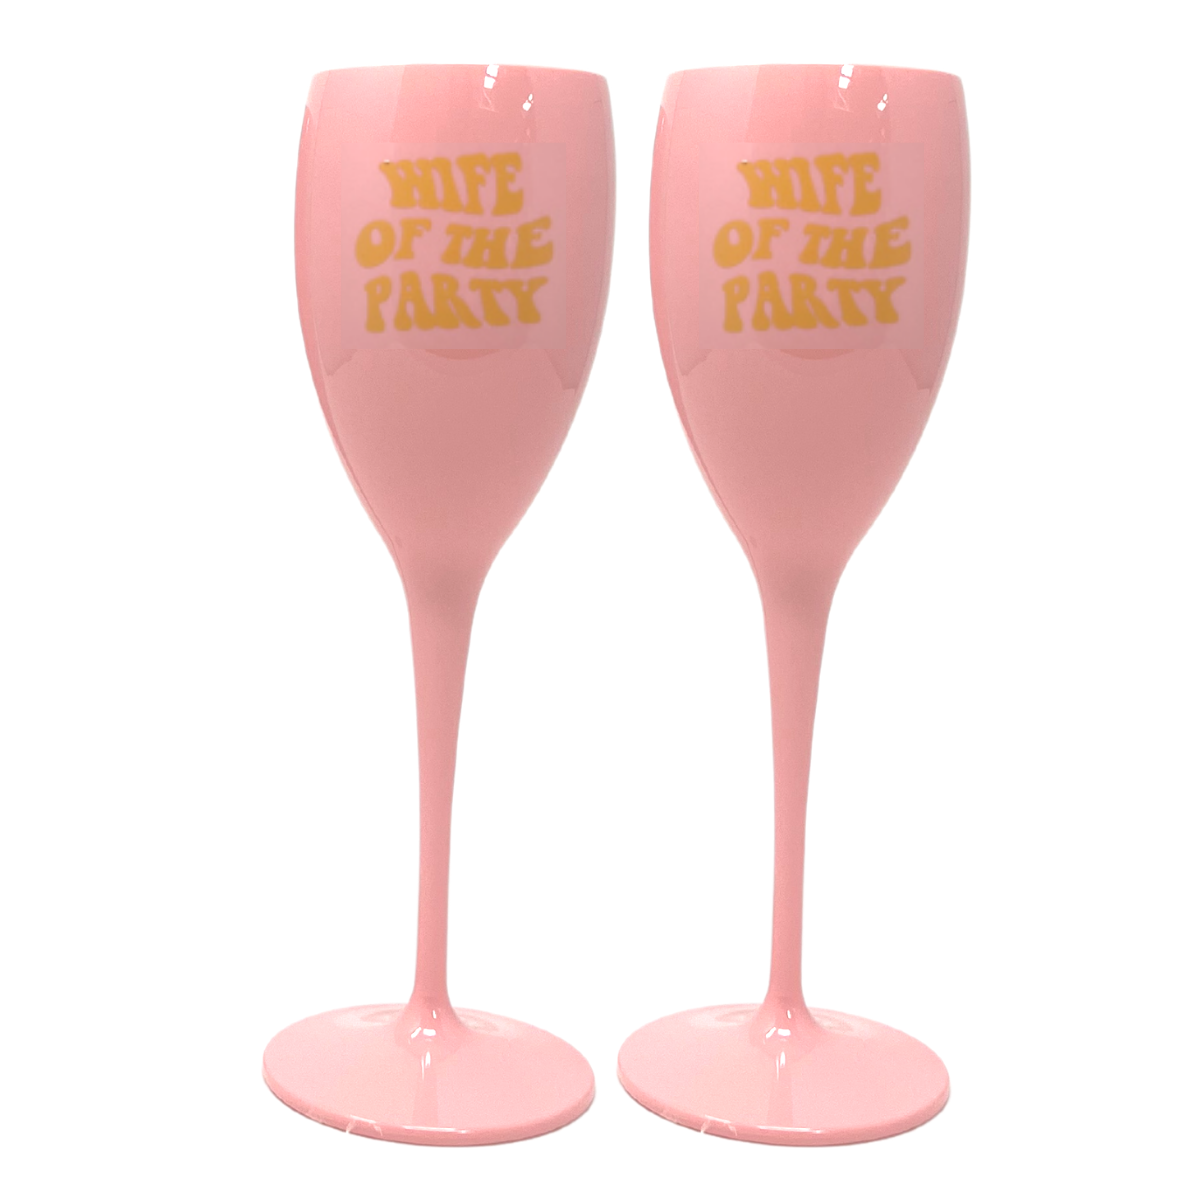 Set of 2 Wife Of The Party Champagne Flute